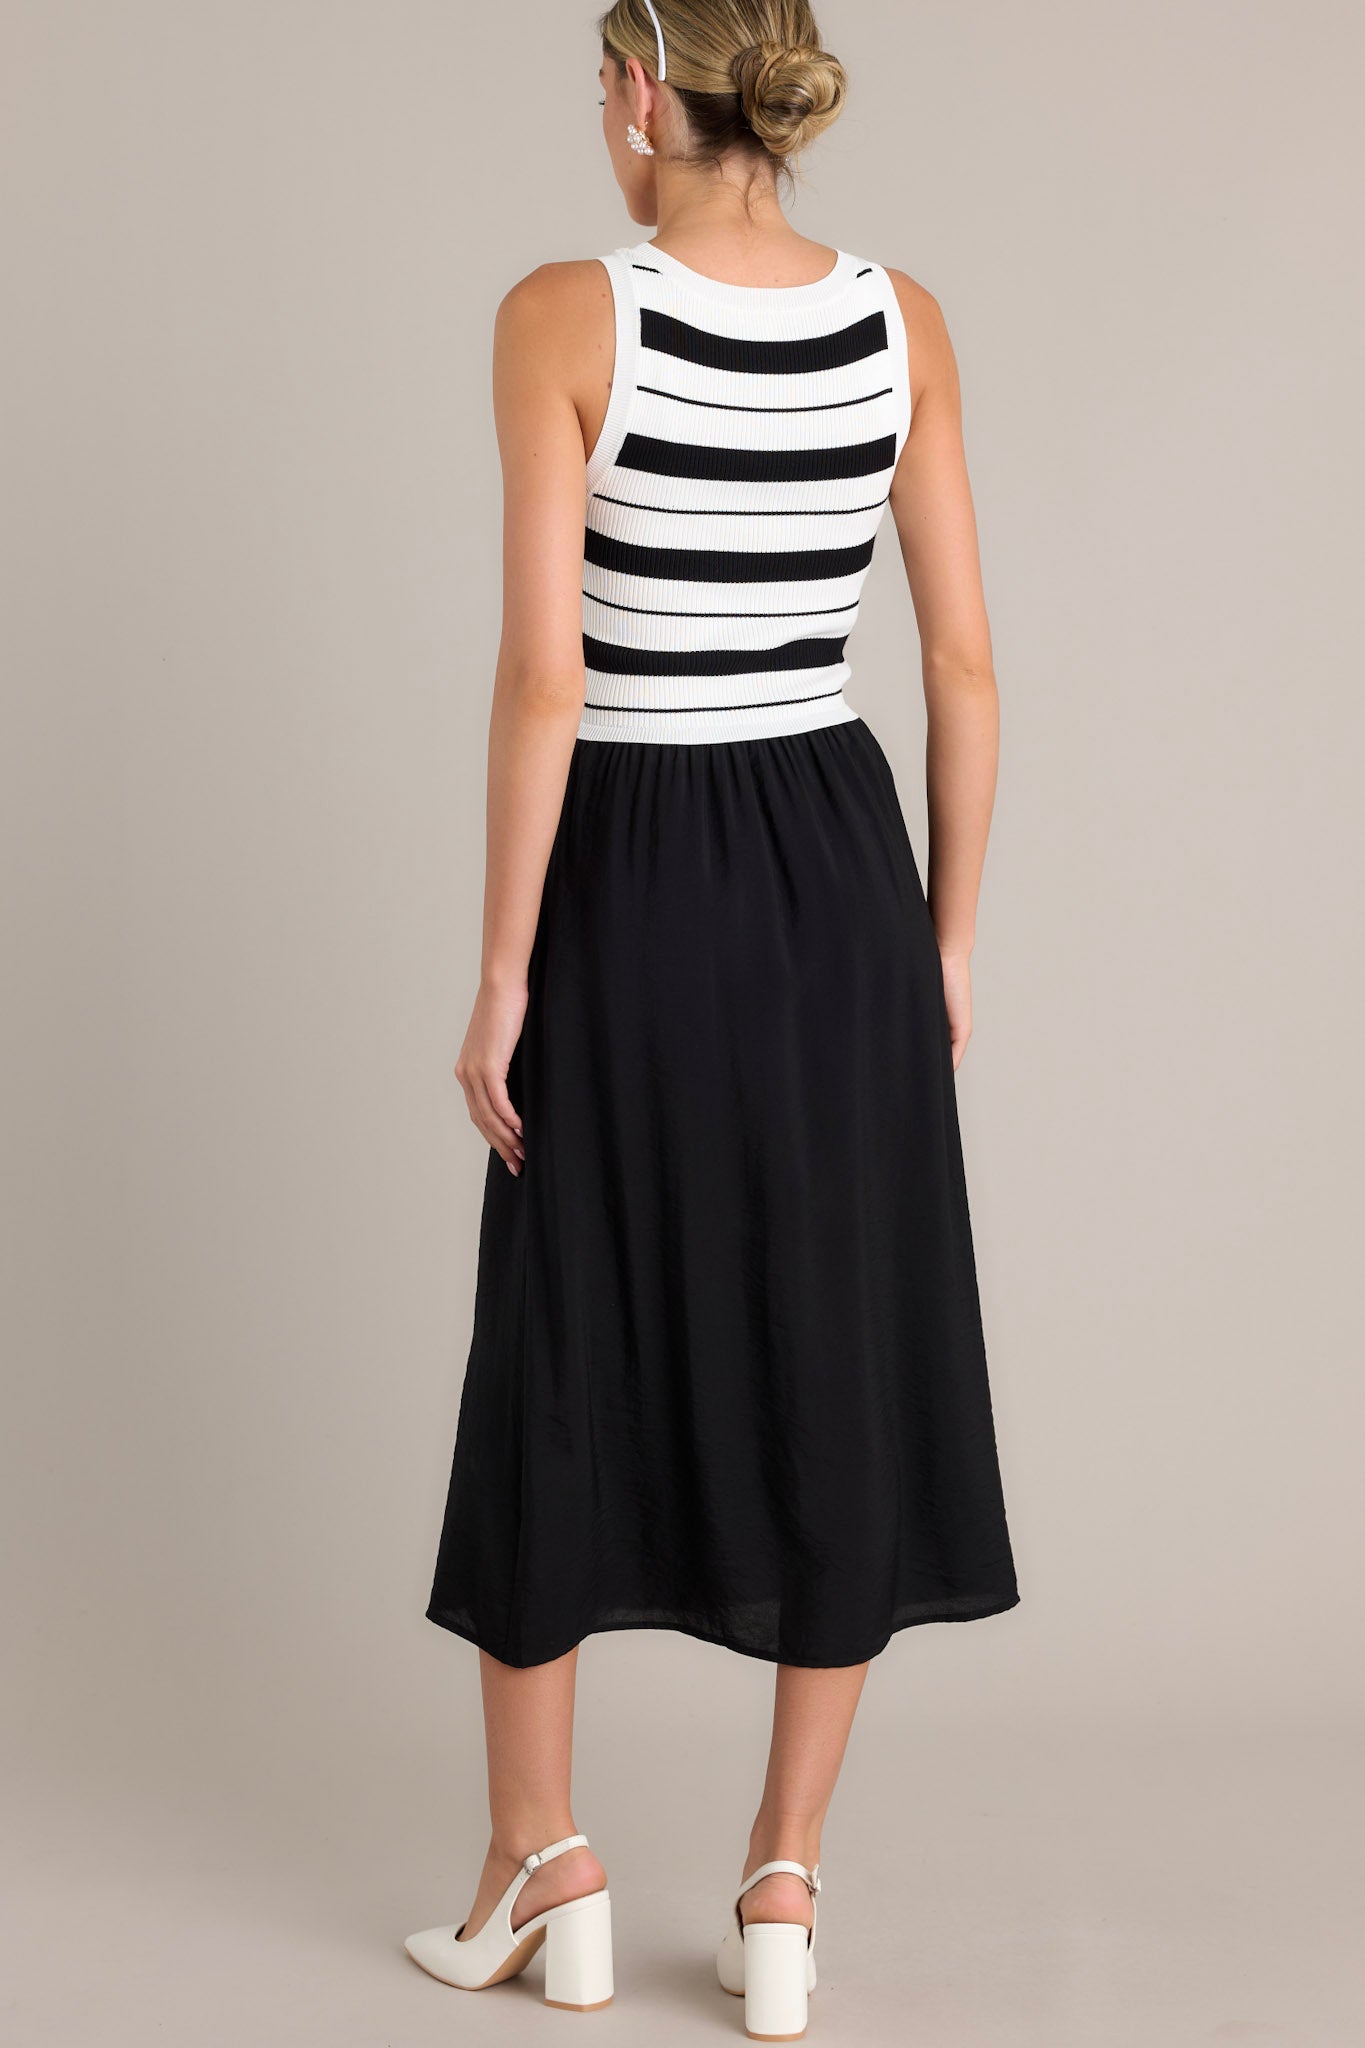 Back view of a black striped midi dress highlighting the striped sweater-like bodice, solid colored skirt, and sleeveless design.